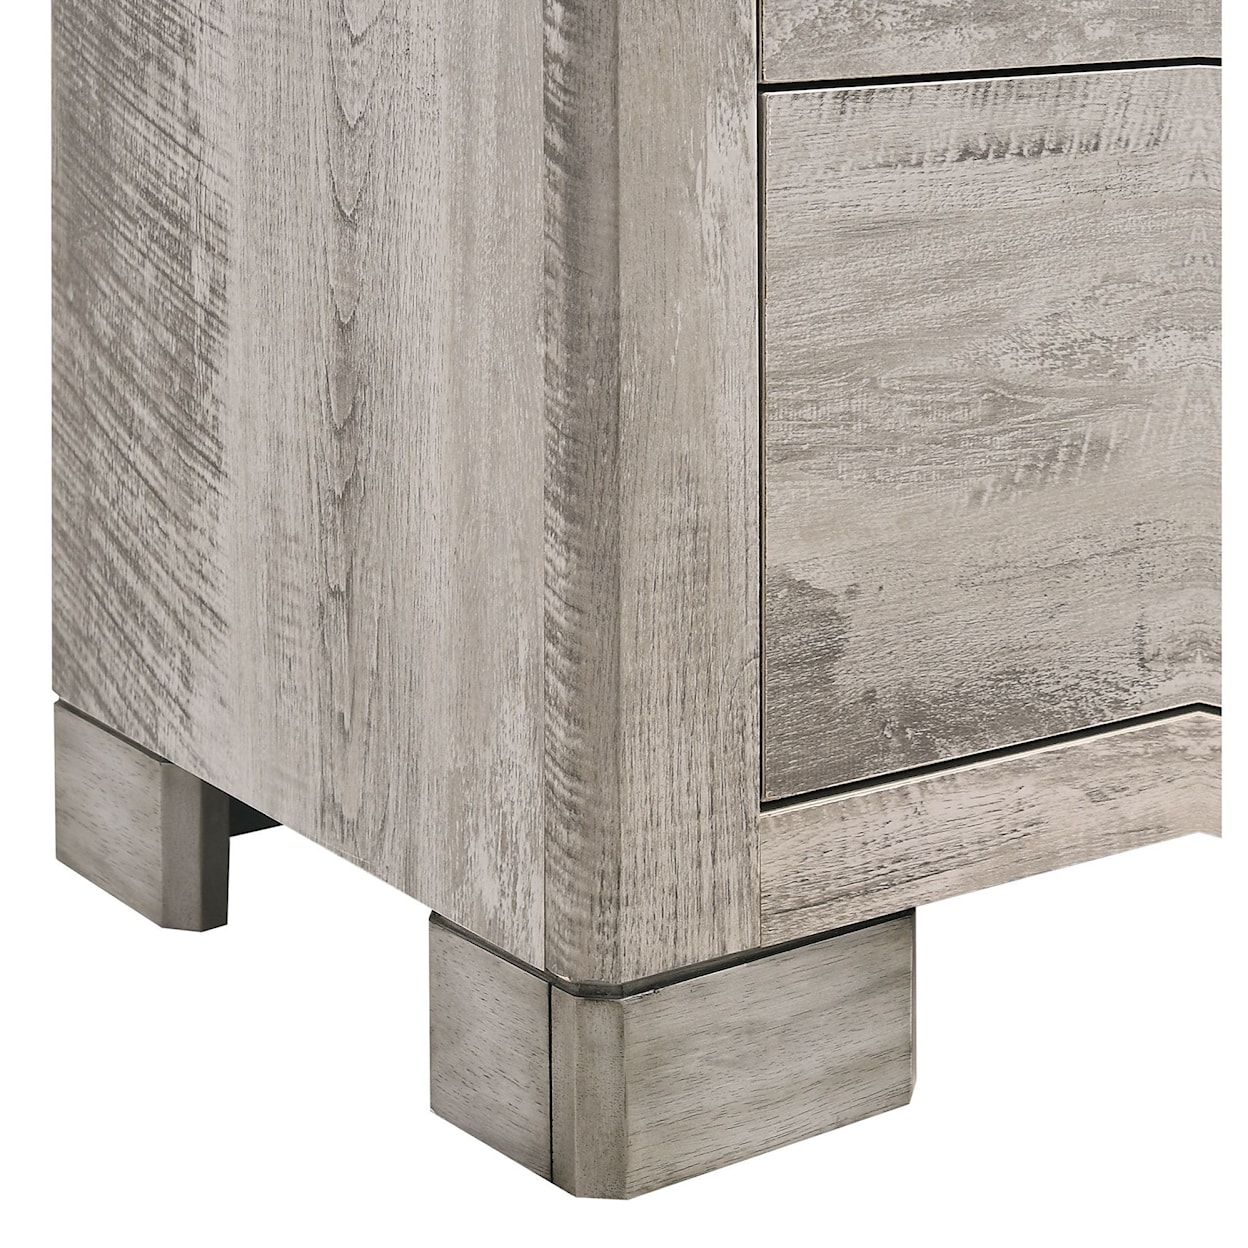 Elements Millers Cove- 6-Drawer Dresser